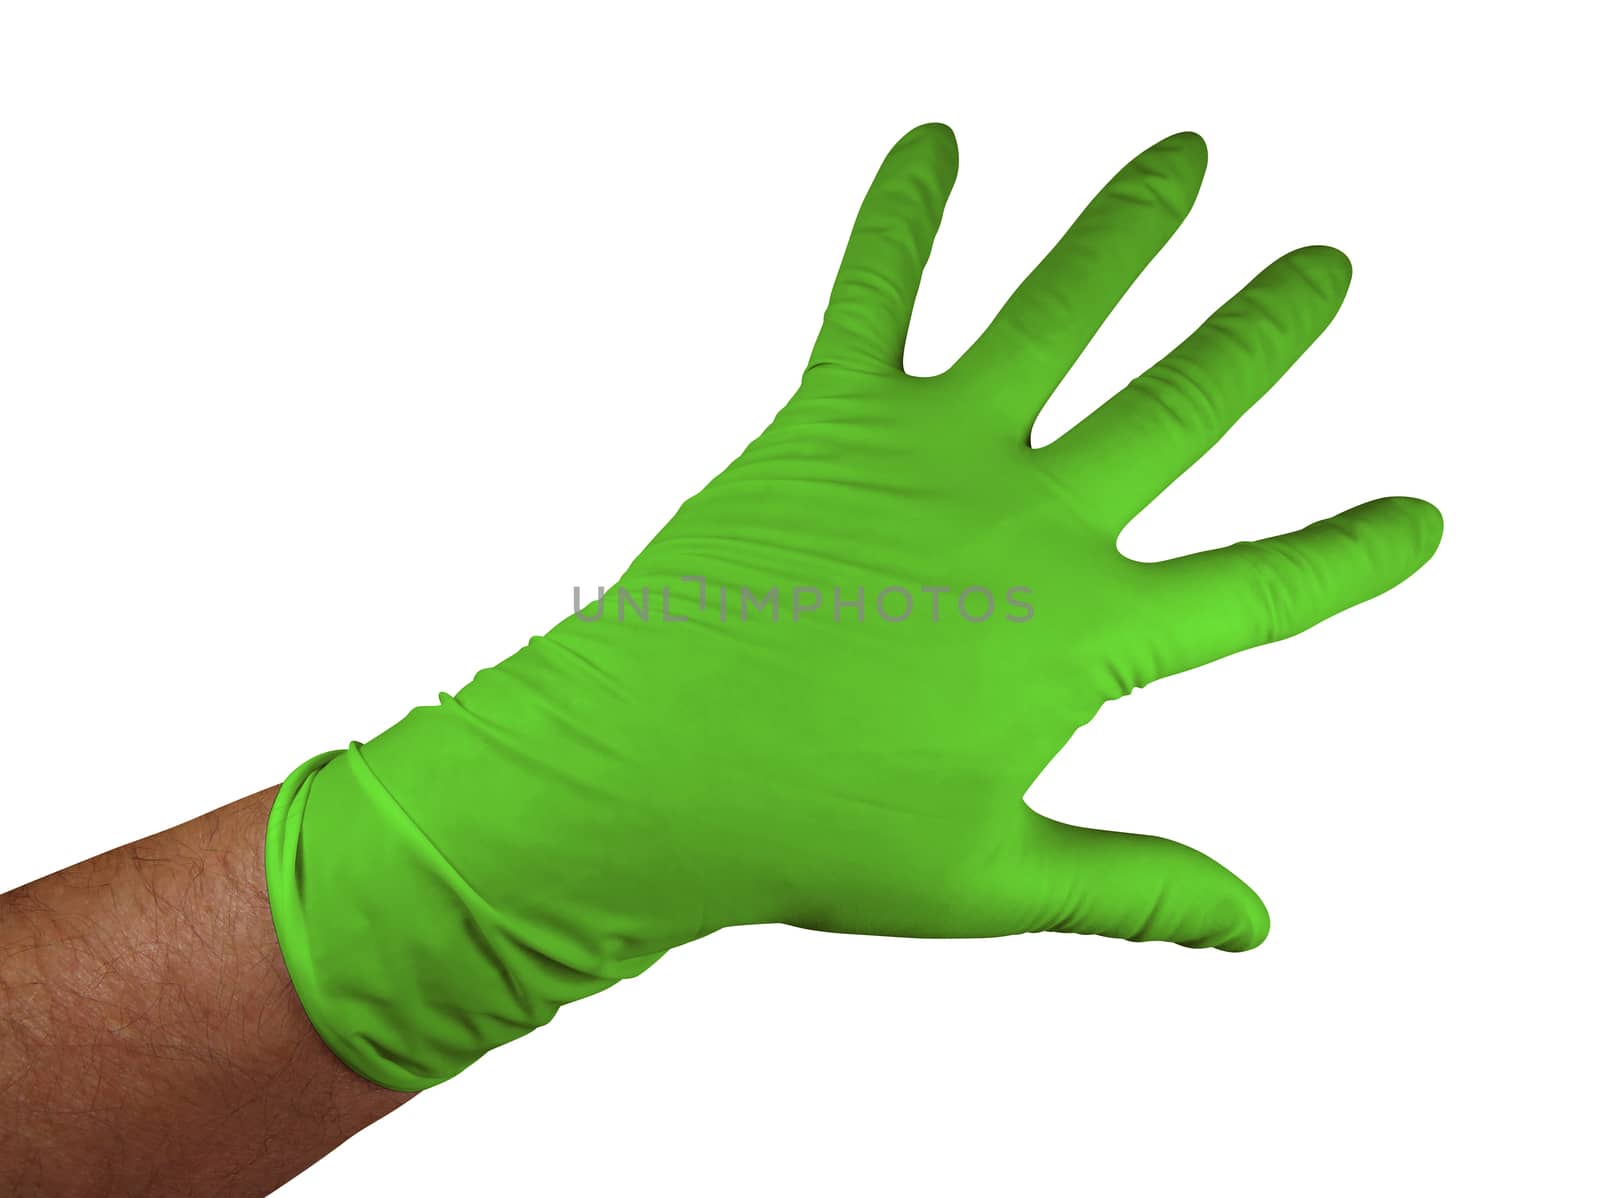 Green medical rubber gloves, isolated on white background. Clipping Path included.